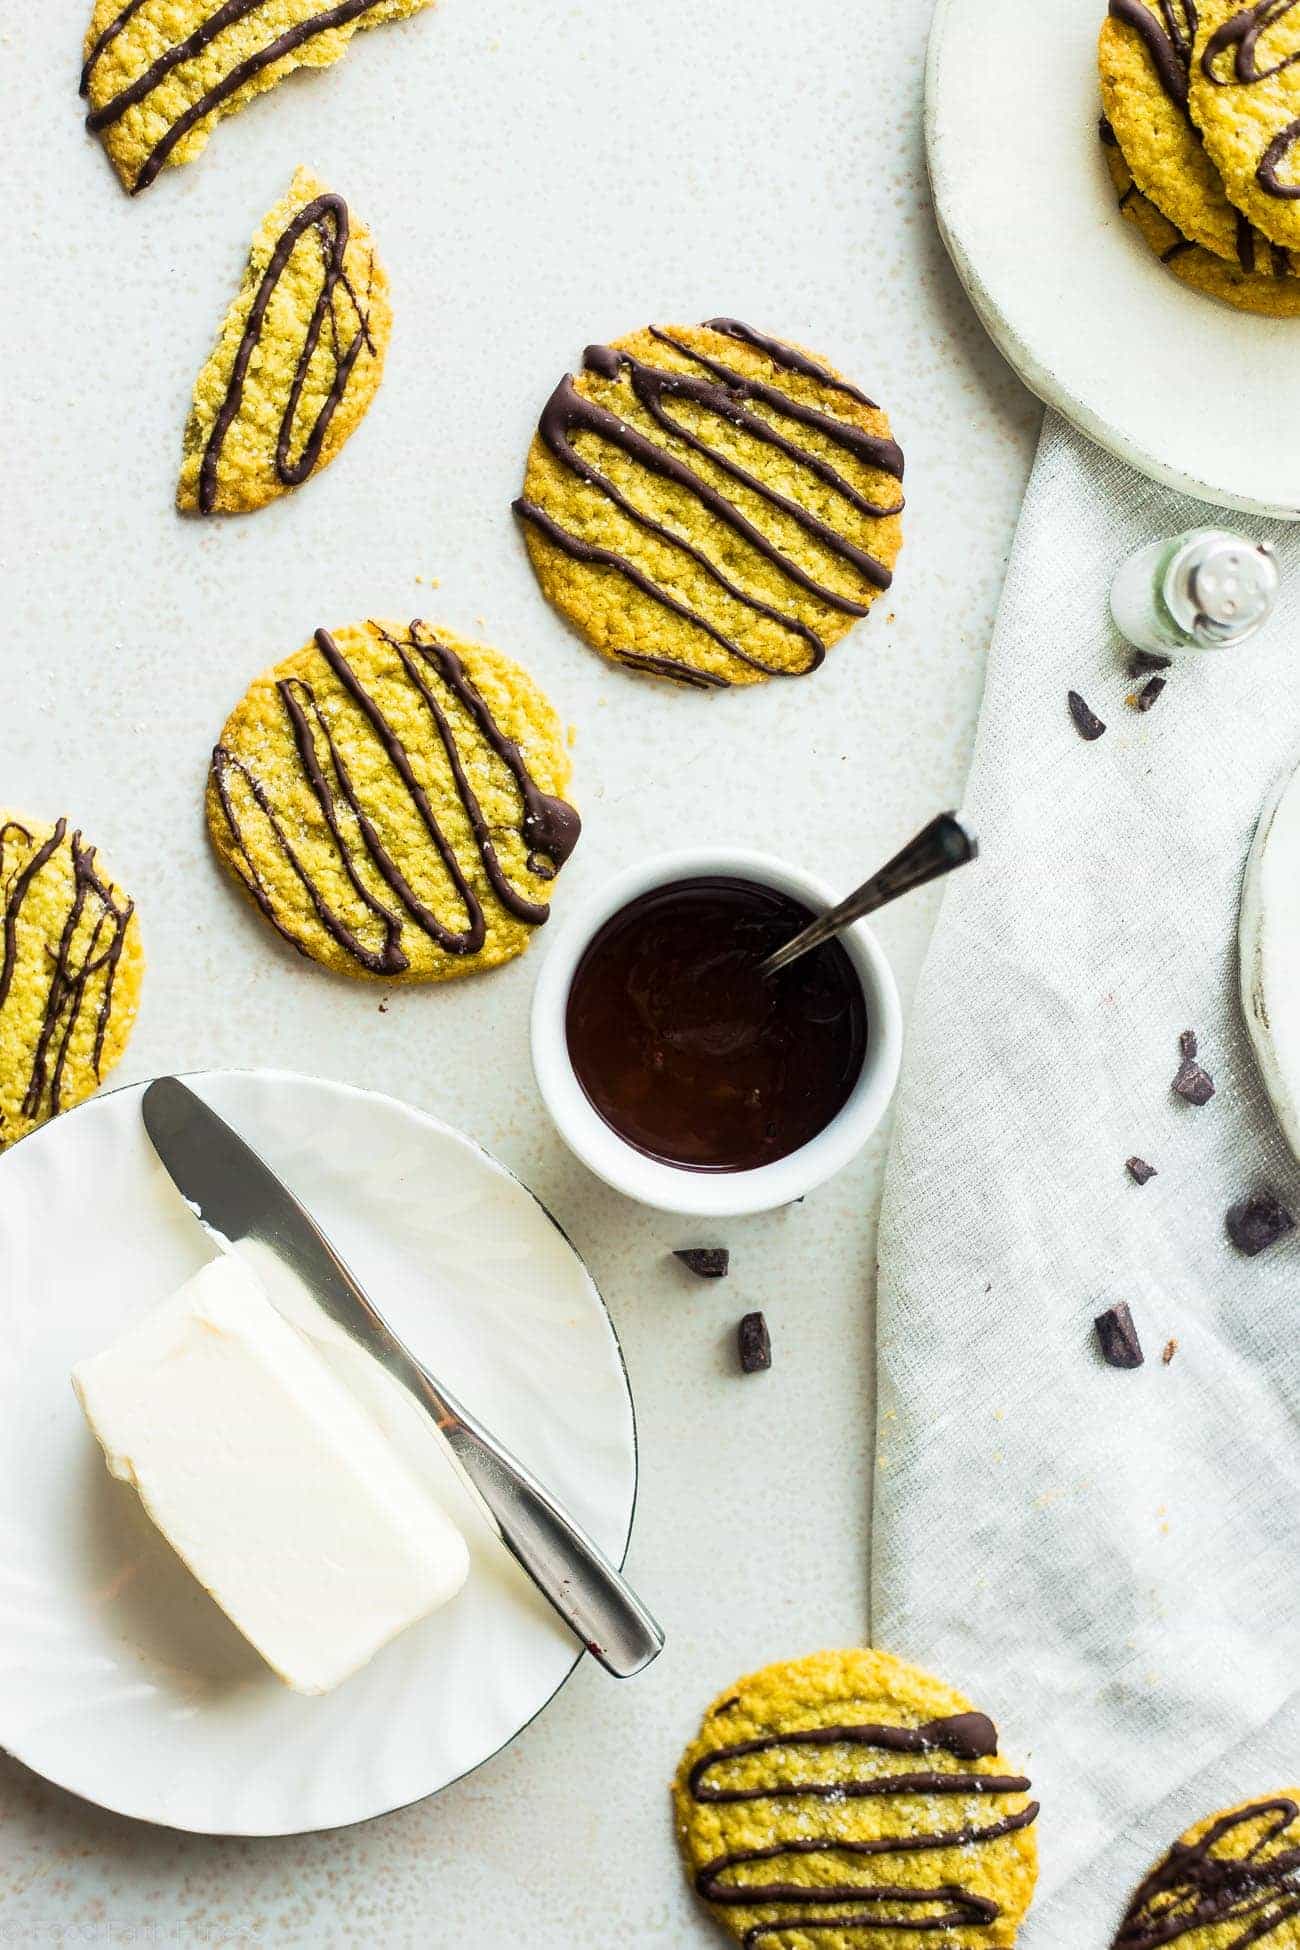 Gluten Free Salted Chocolate Pistachio Whipped Shortbread Cookies - These 5 ingredient, low carb and gluten free shortbread cookies are salty-sweet and melt in your mouth! The perfect, healthy Christmas cookie! | Foodfaithfitness.com | @FoodFaithFit